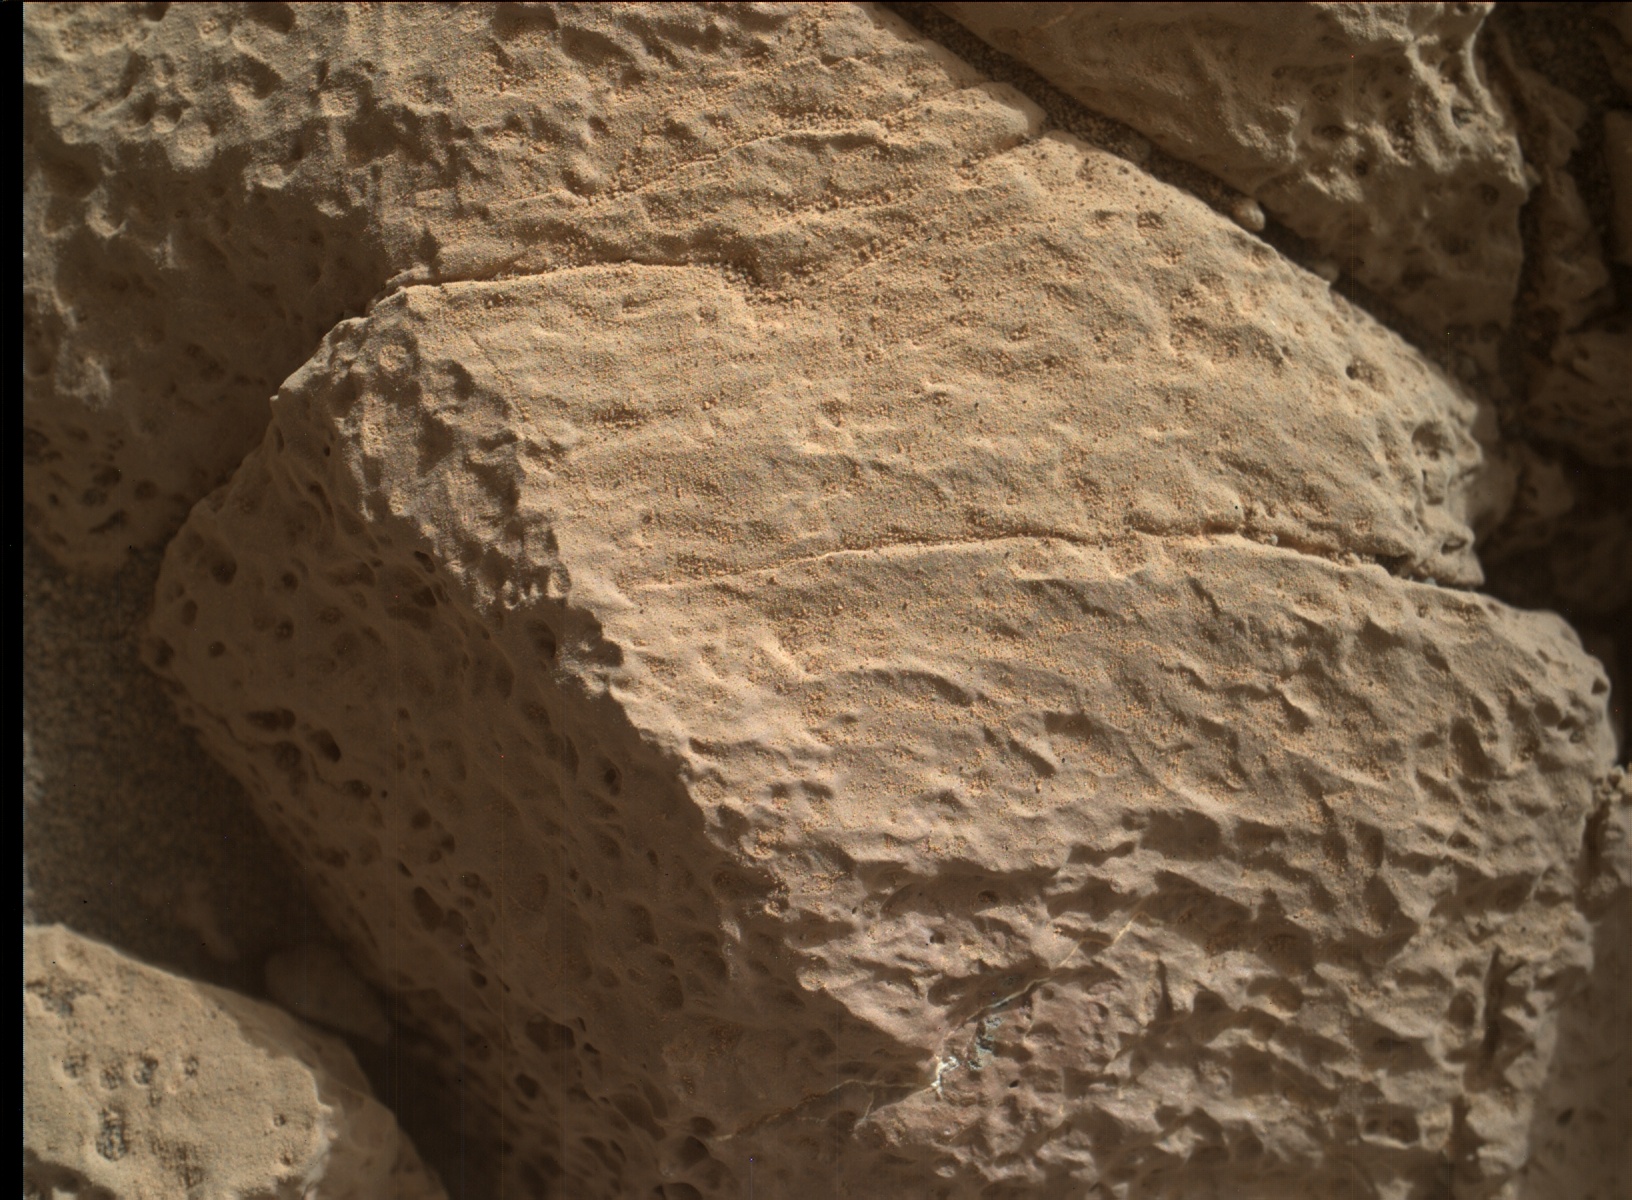 Nasa's Mars rover Curiosity acquired this image using its Mars Hand Lens Imager (MAHLI) on Sol 1403